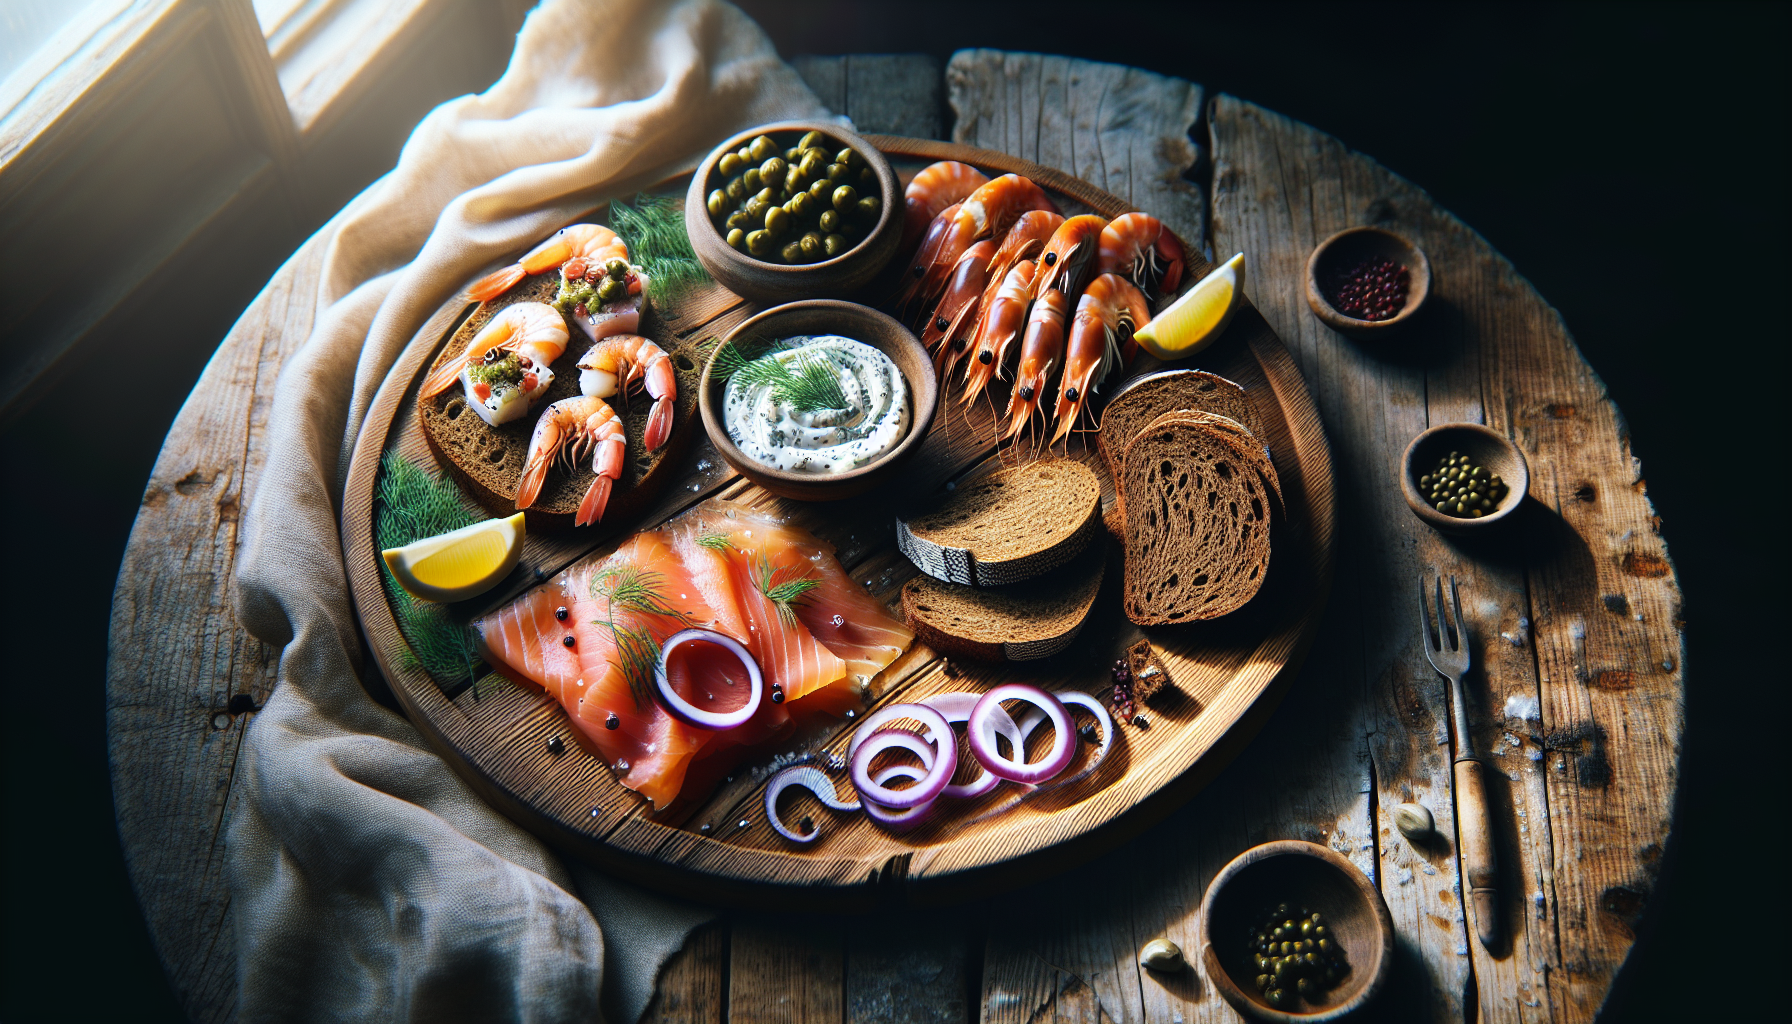 Can You Suggest A Simple And Quick Nordic Appetizer Recipe?